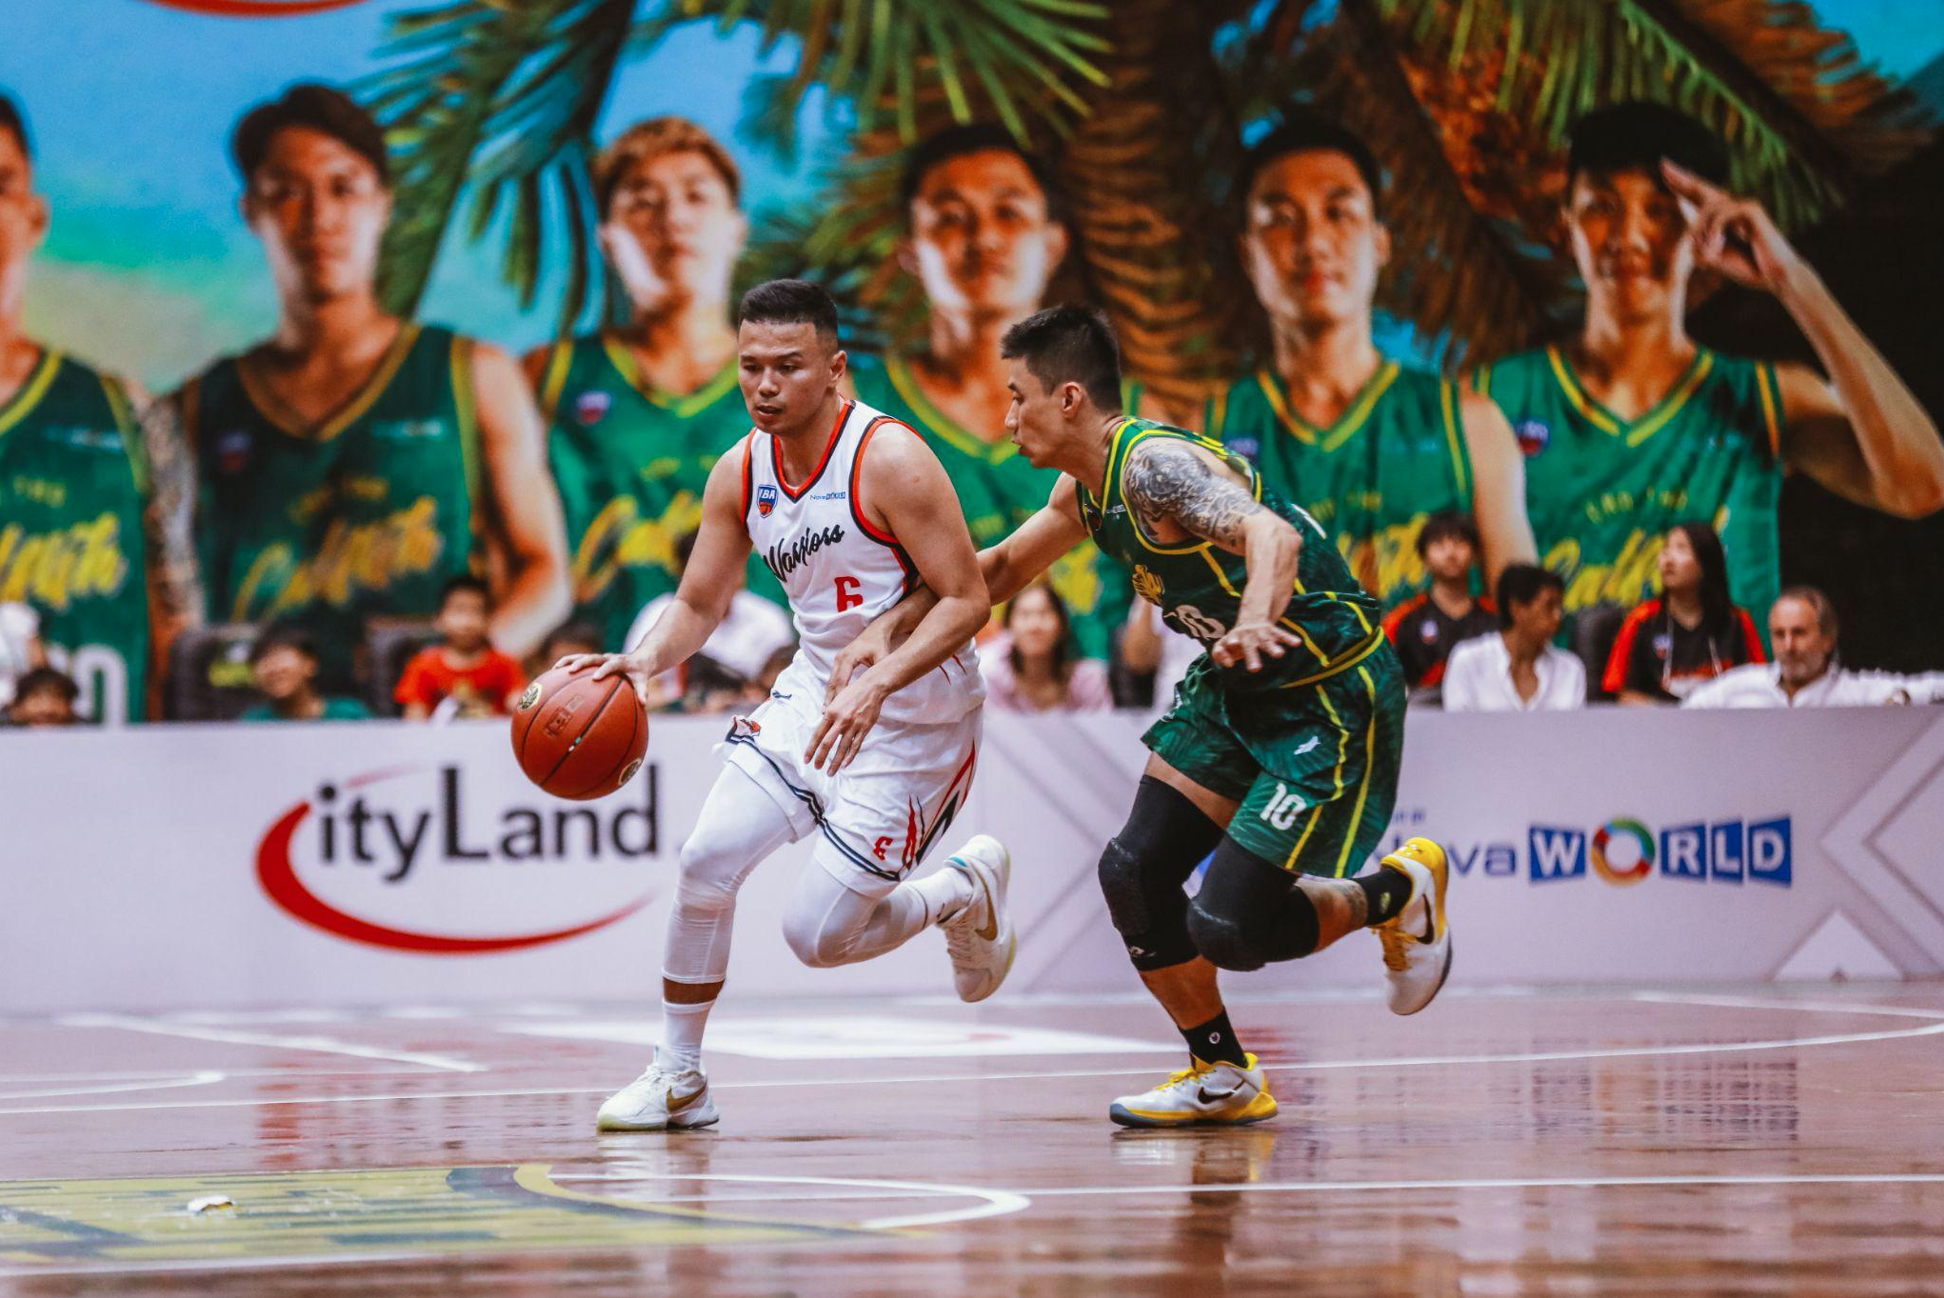 Vietnamese basketball players make a comeback after serious injuries